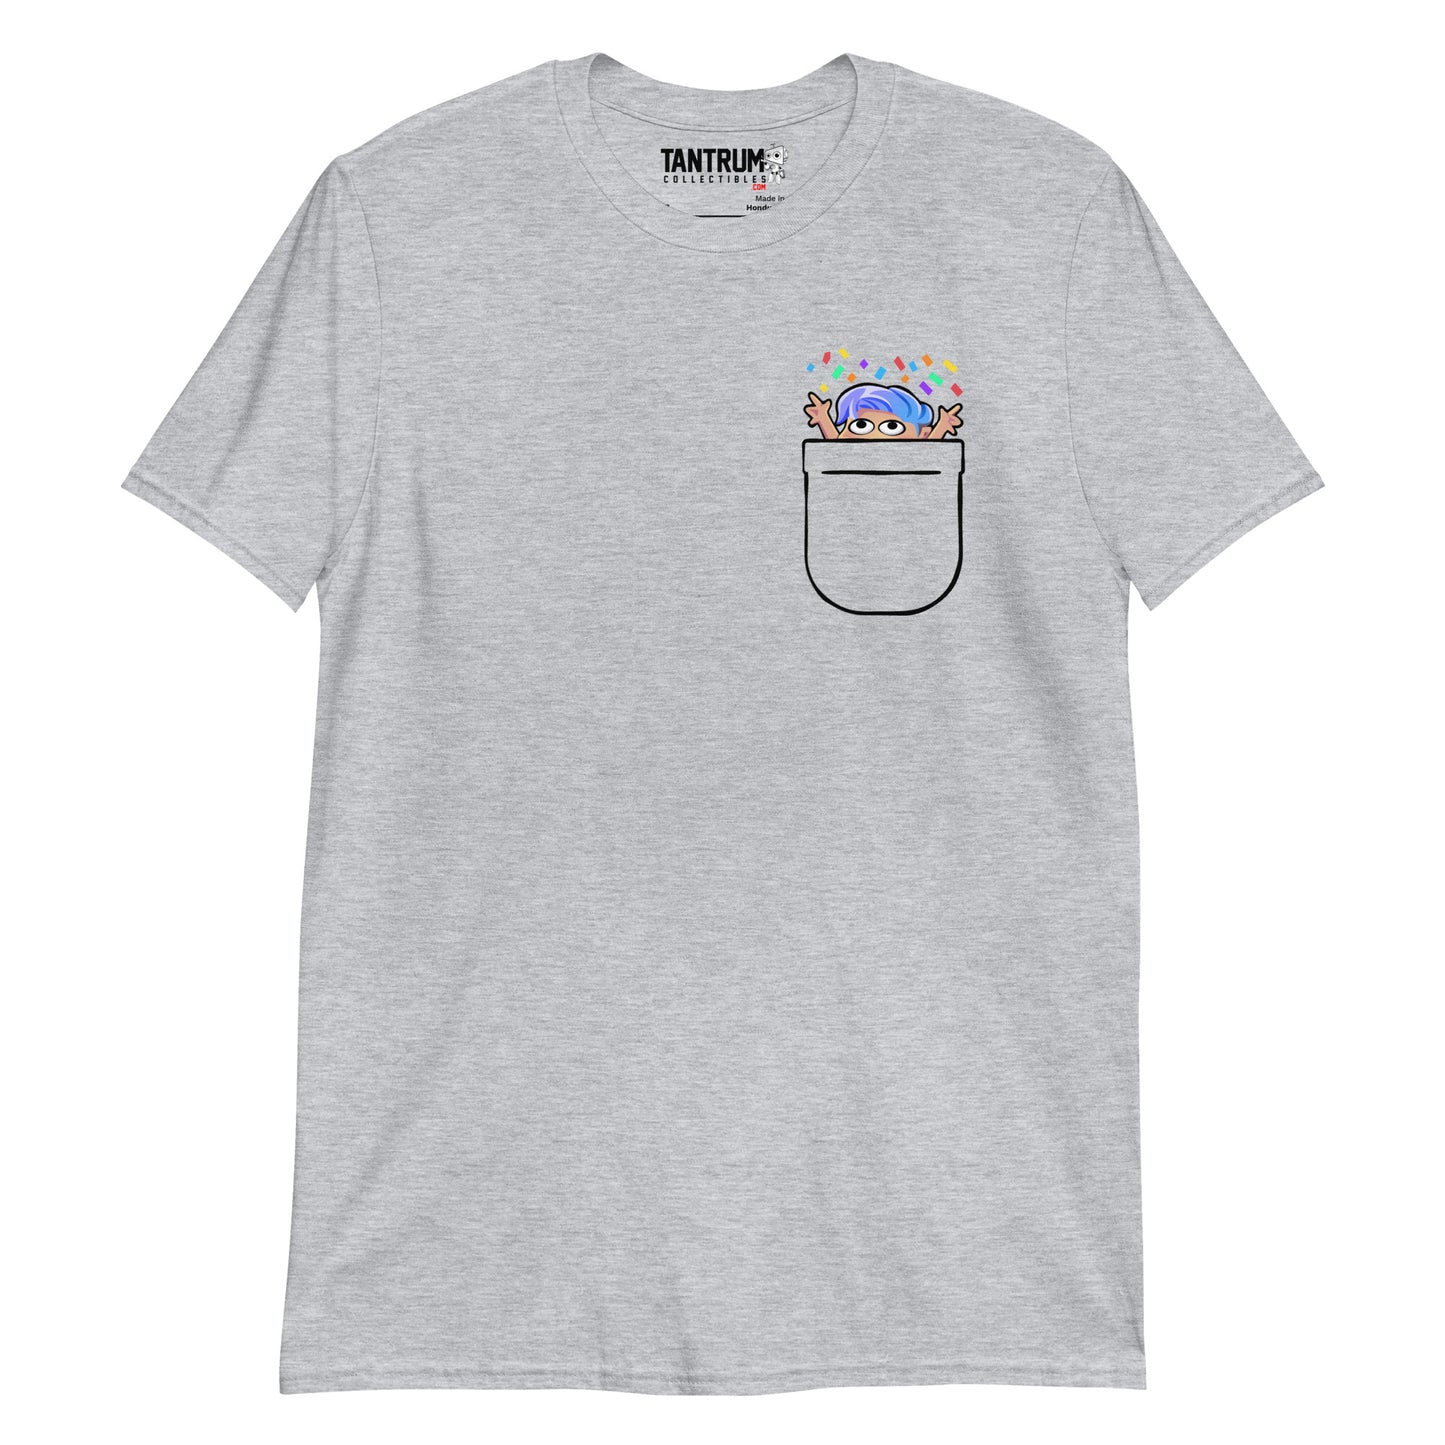 Fareeha - Unisex T-Shirt - Printed Pocket Party (Streamer Purchase)